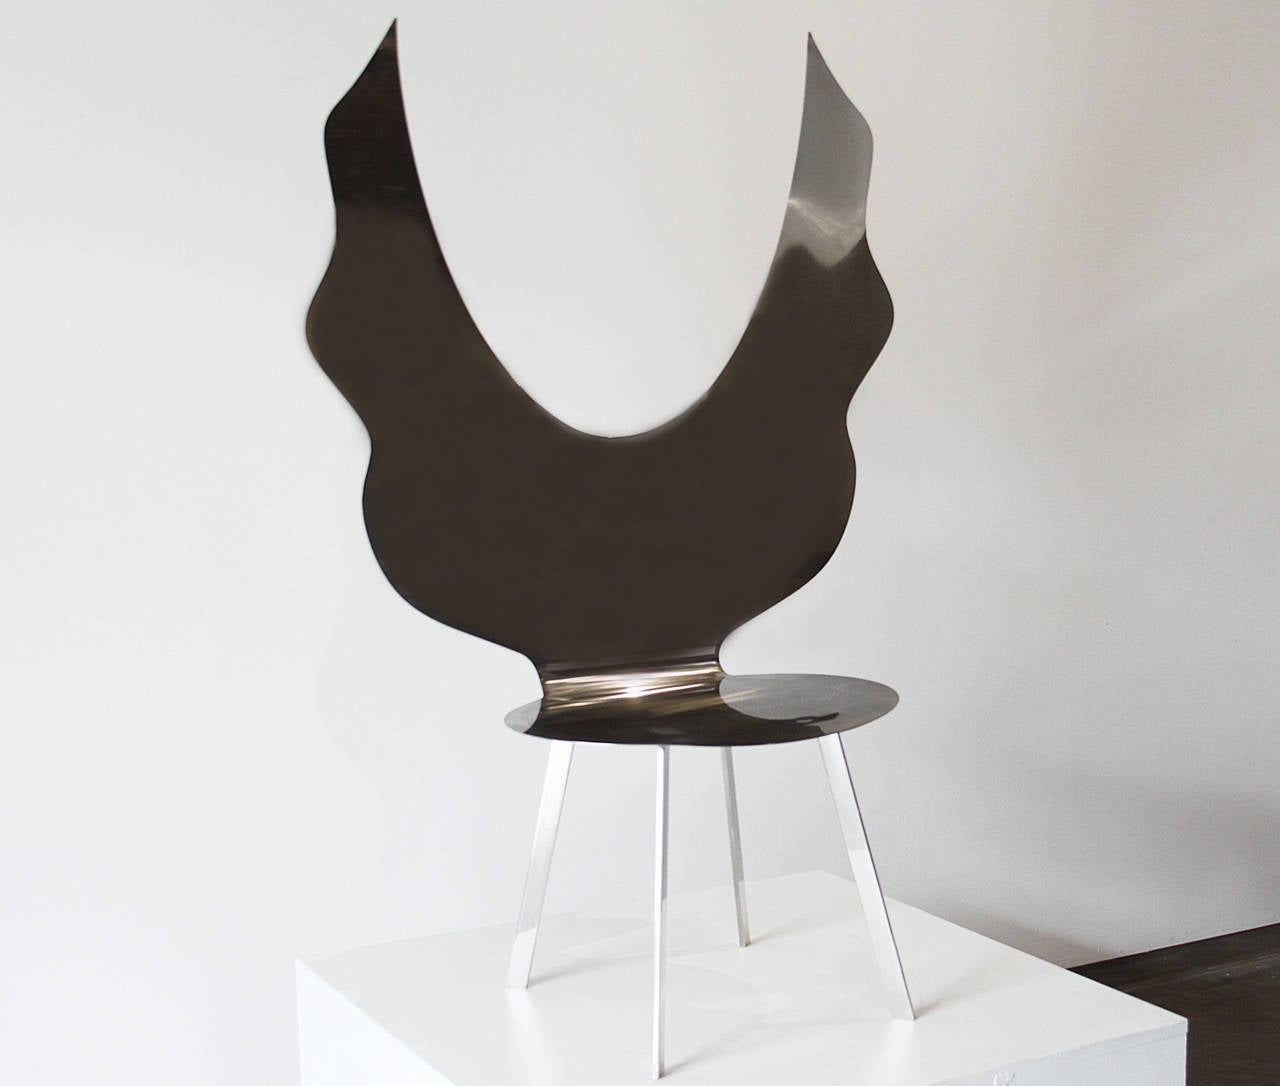 A sculptural chair made of stainless steel by Brazilian designer Alê Jordão. There are two versions of this chair 